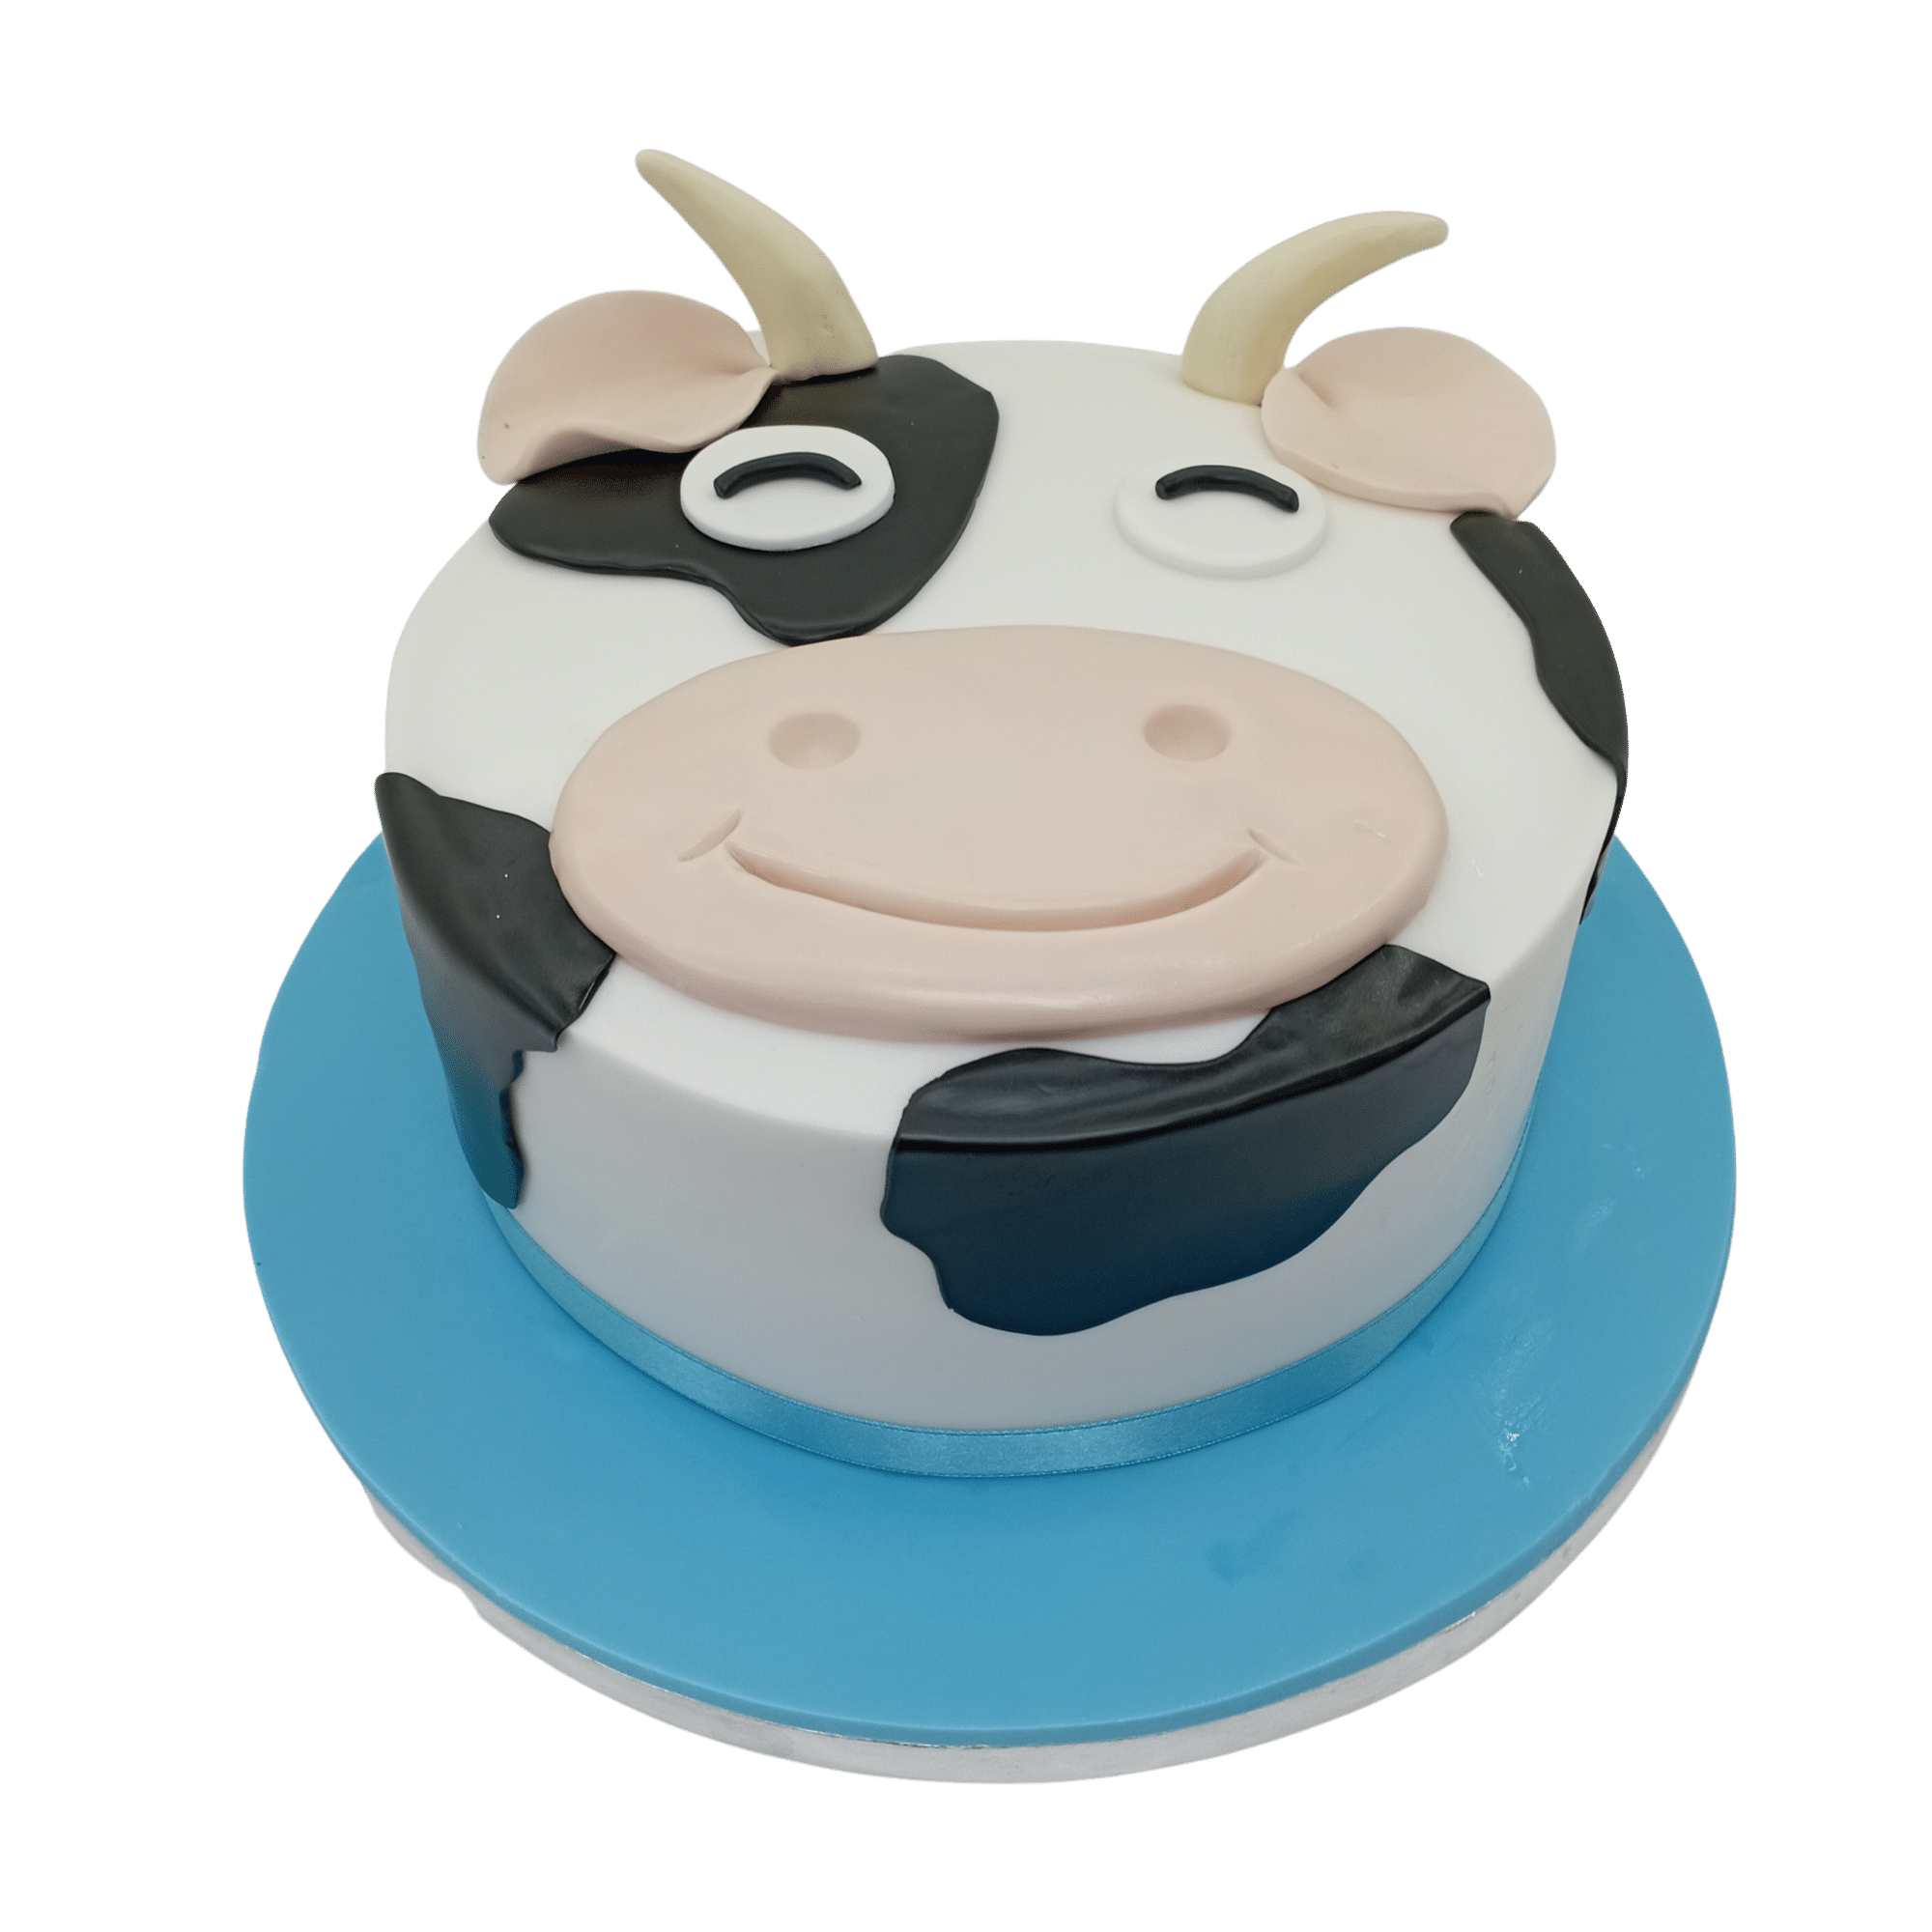 Cow cake for kids